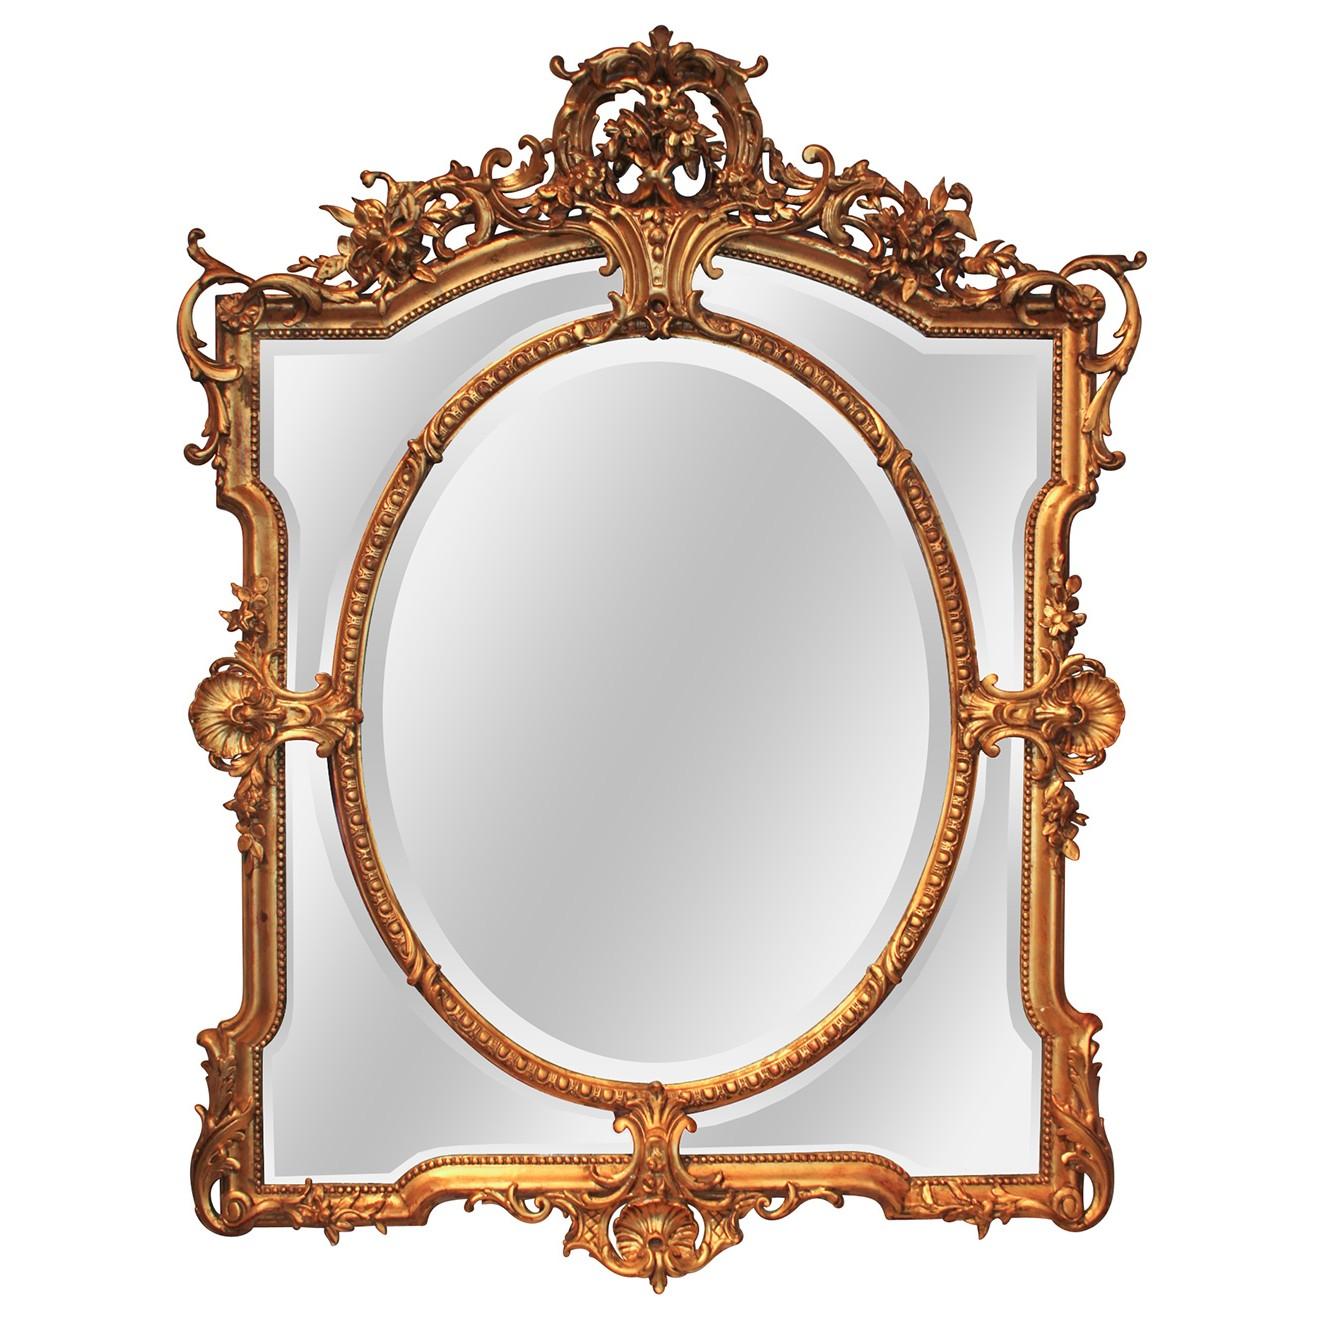 19th Century French Rococo Revival Giltwood Wall Mirror